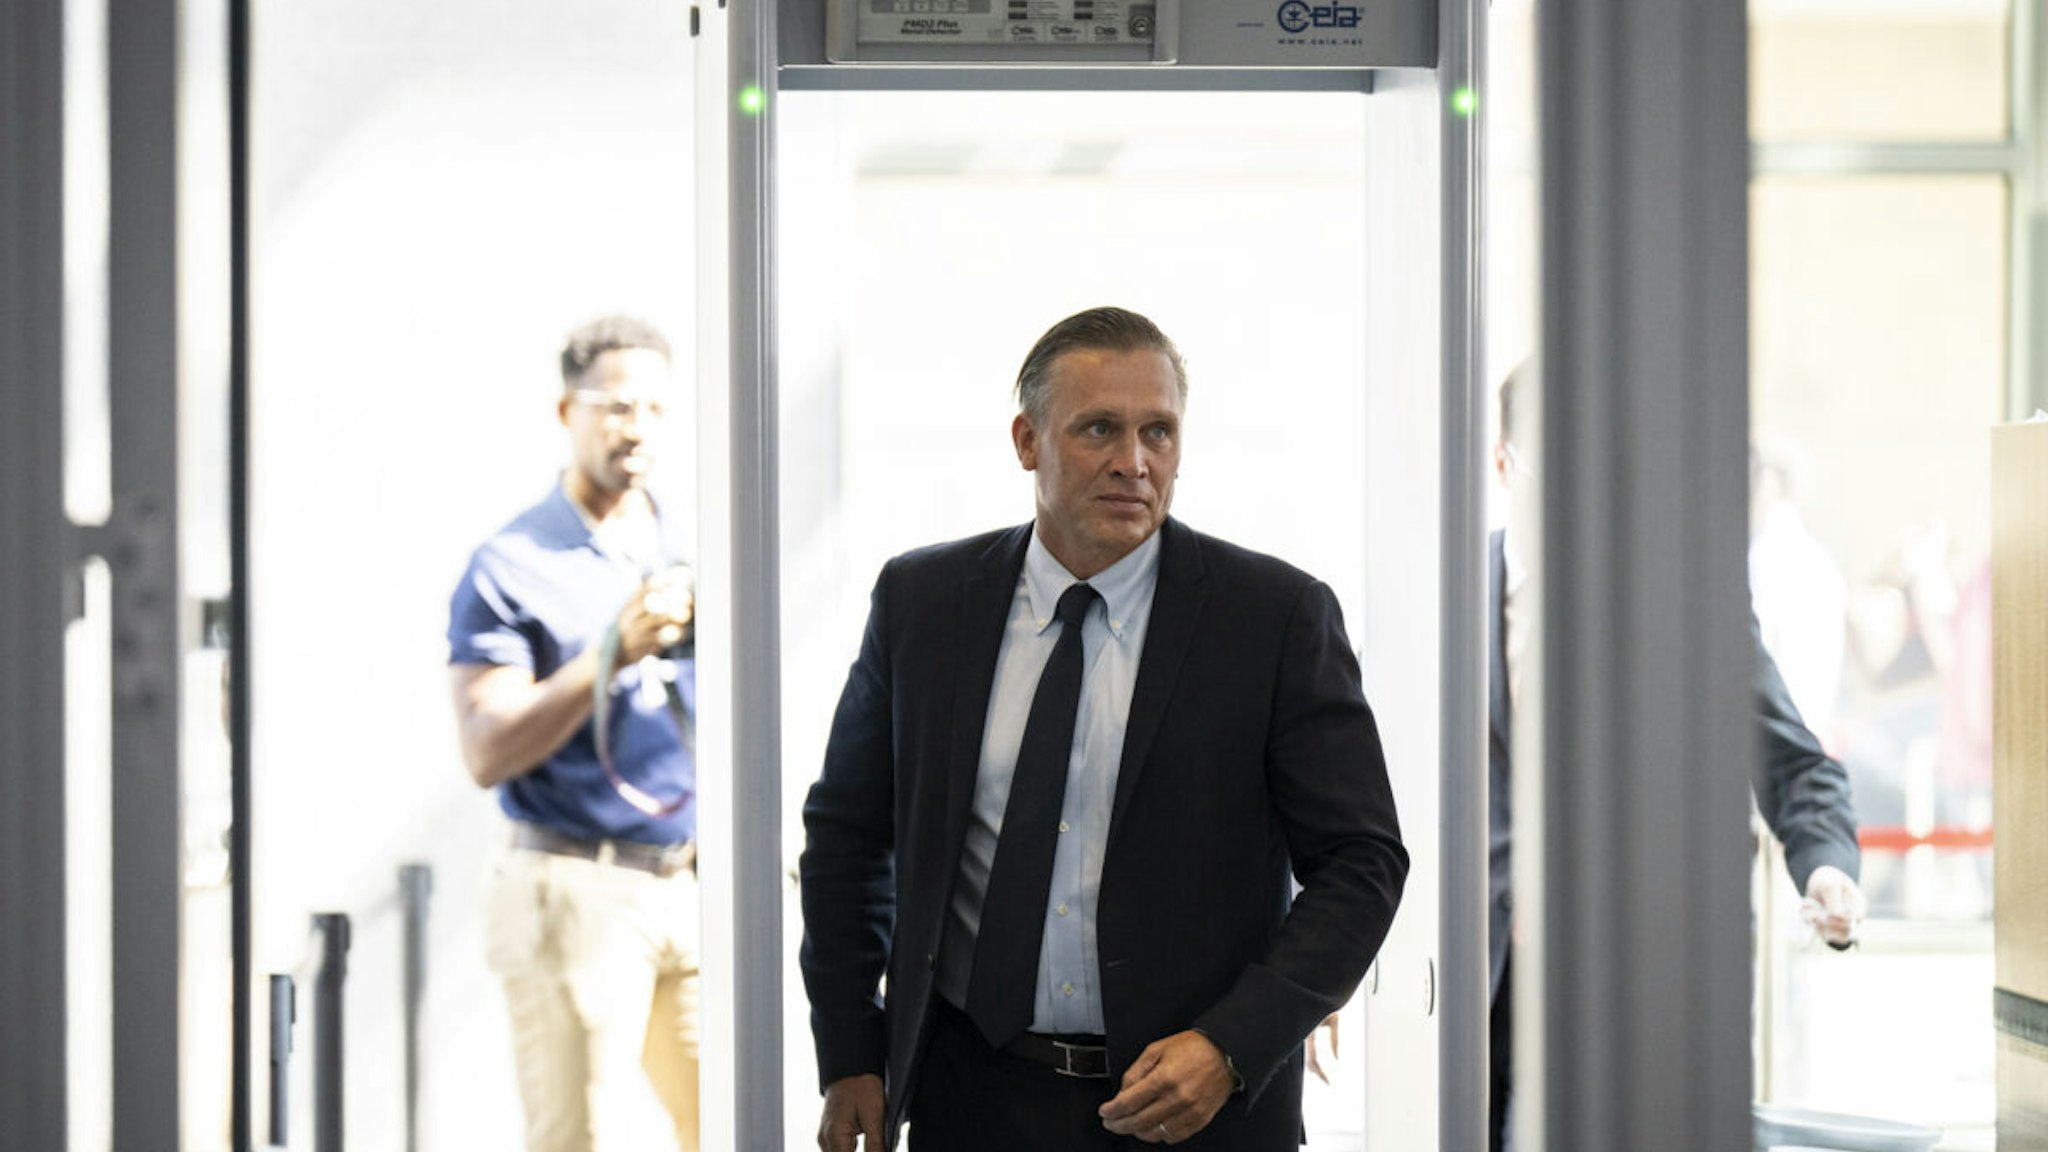 Devon Archer, a former business associate of Hunter Biden, arrives for closed-door testimony with the House Oversight Committee at the O'Neill House Office Building July 31, 2023 in Washington, DC.